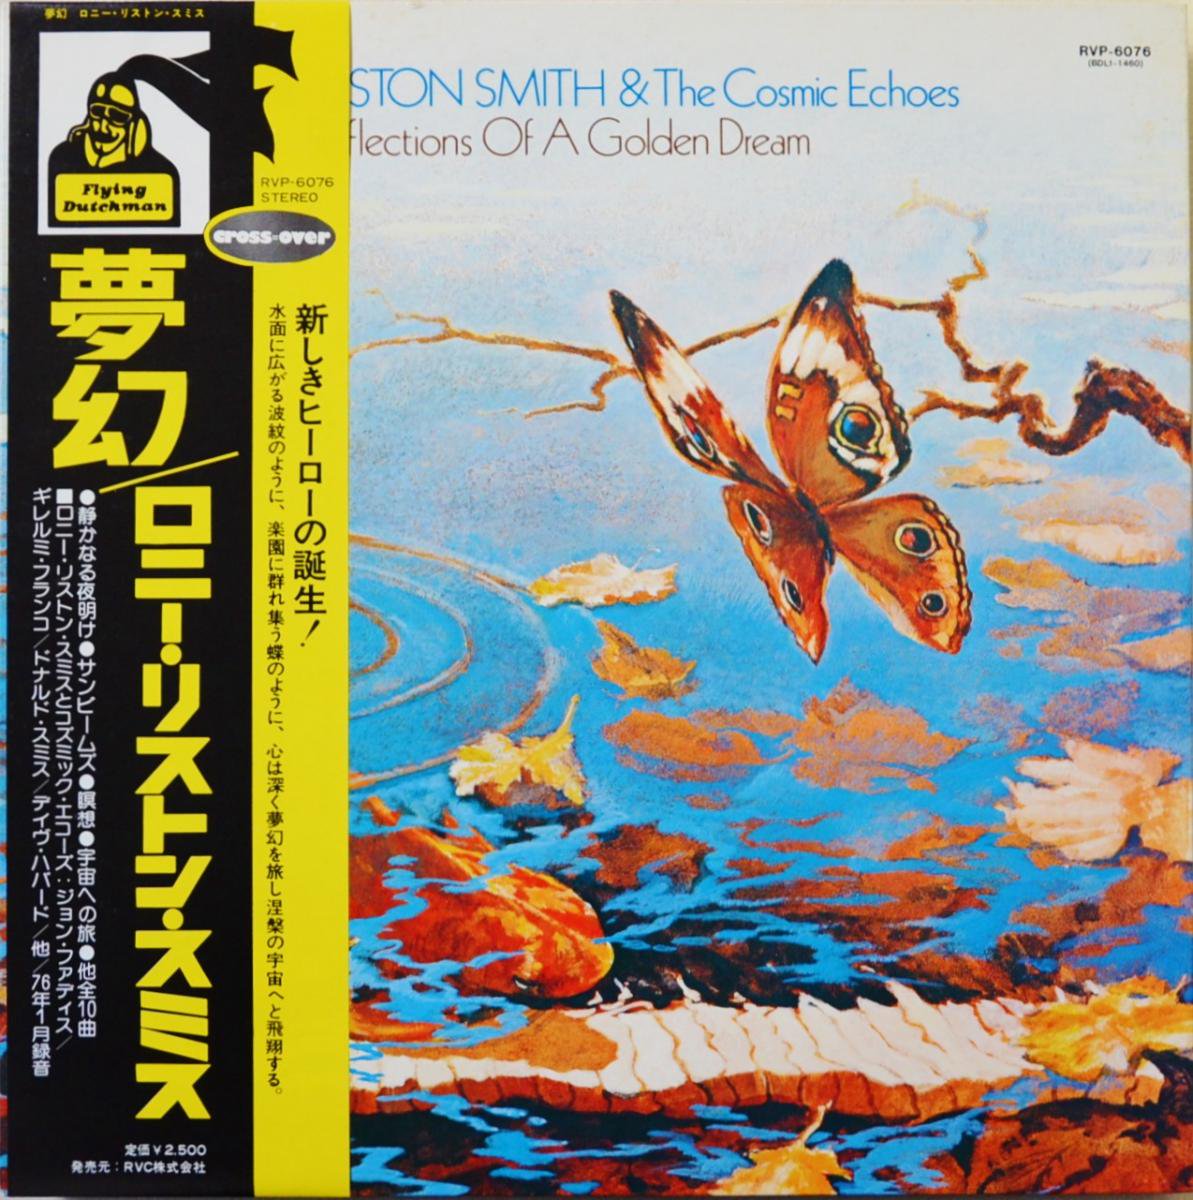 ˡꥹȥ󡦥ߥ LONNIE LISTON SMITH AND THE COSMIC ECHOES / ̴ REFLECTIONS OF A GOLDEN DREAM (LP)